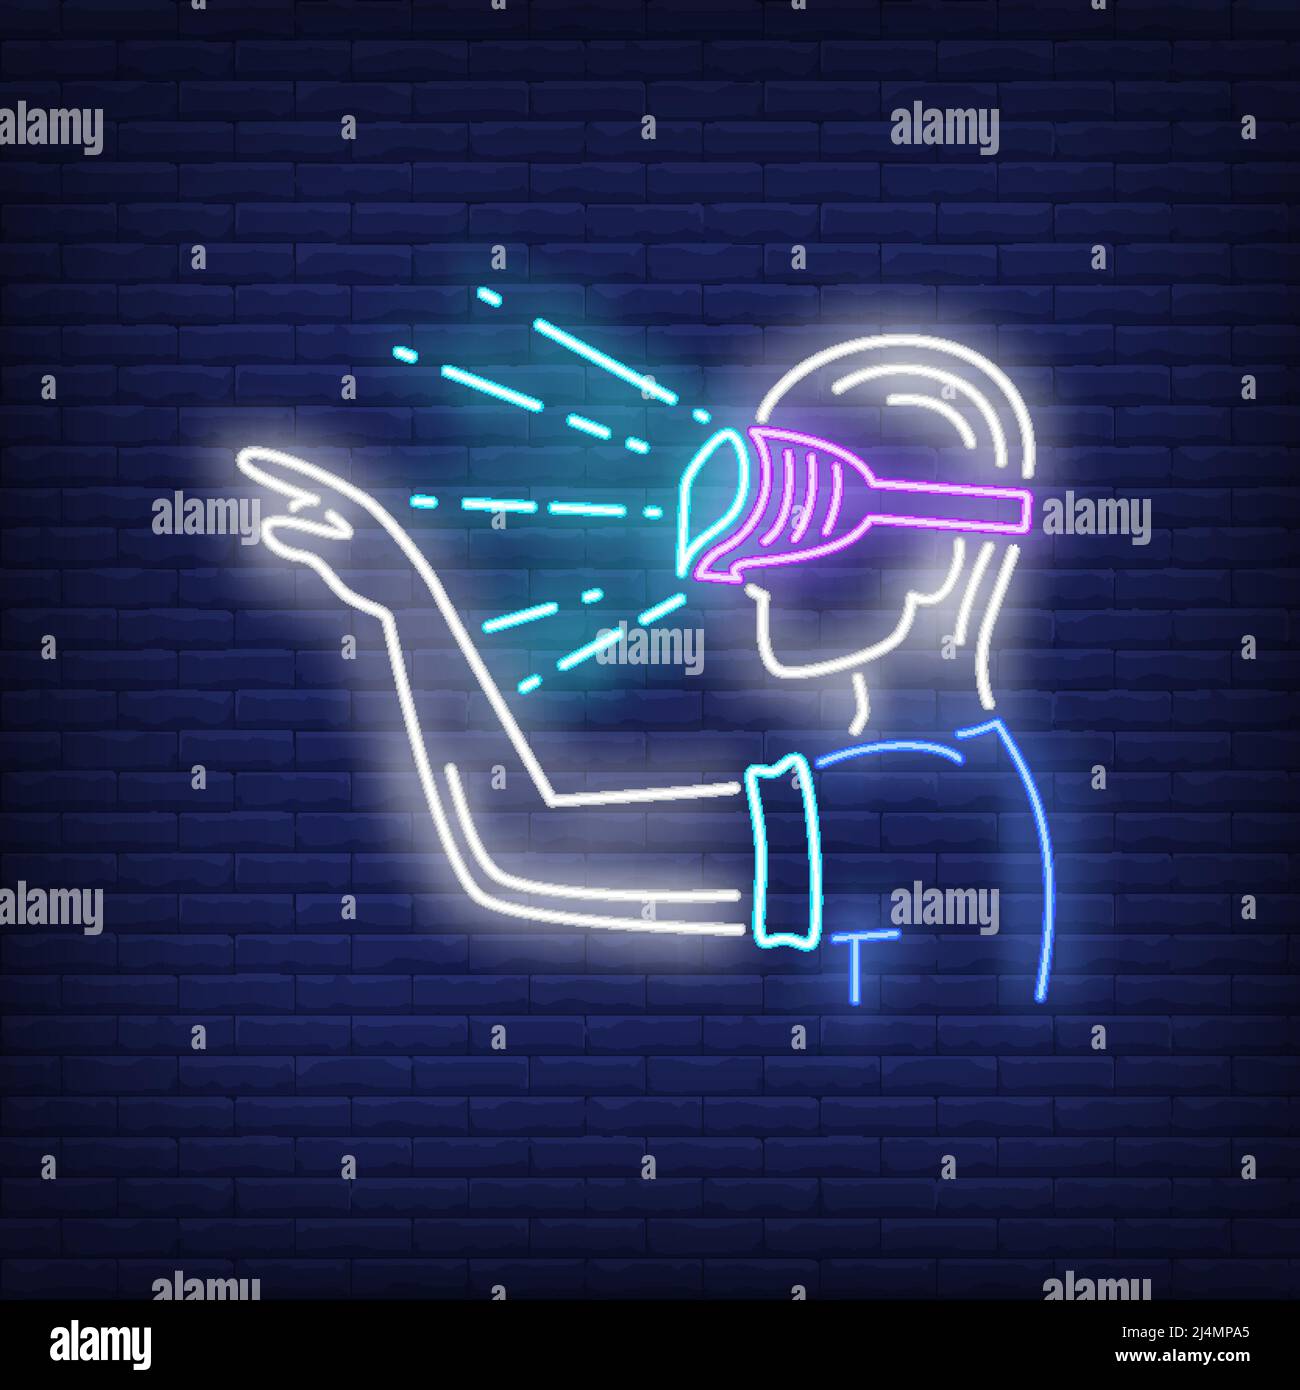 Guy wearing VR goggles neon sign. Man in VR glasses pointing finger on brick wall background. Vector illustration in neon style for billboards, banner Stock Vector